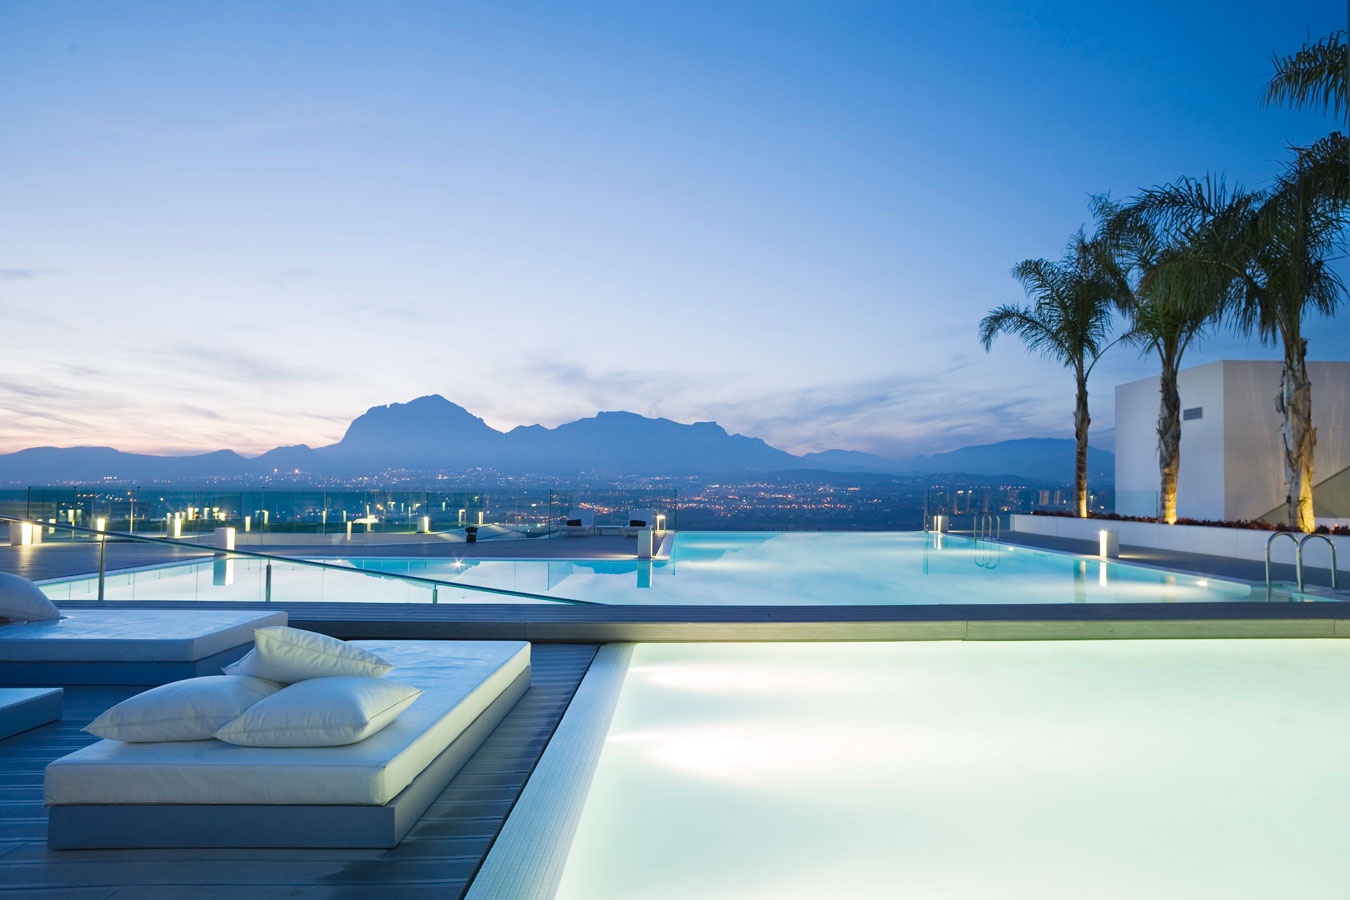 A pool overlooking a view